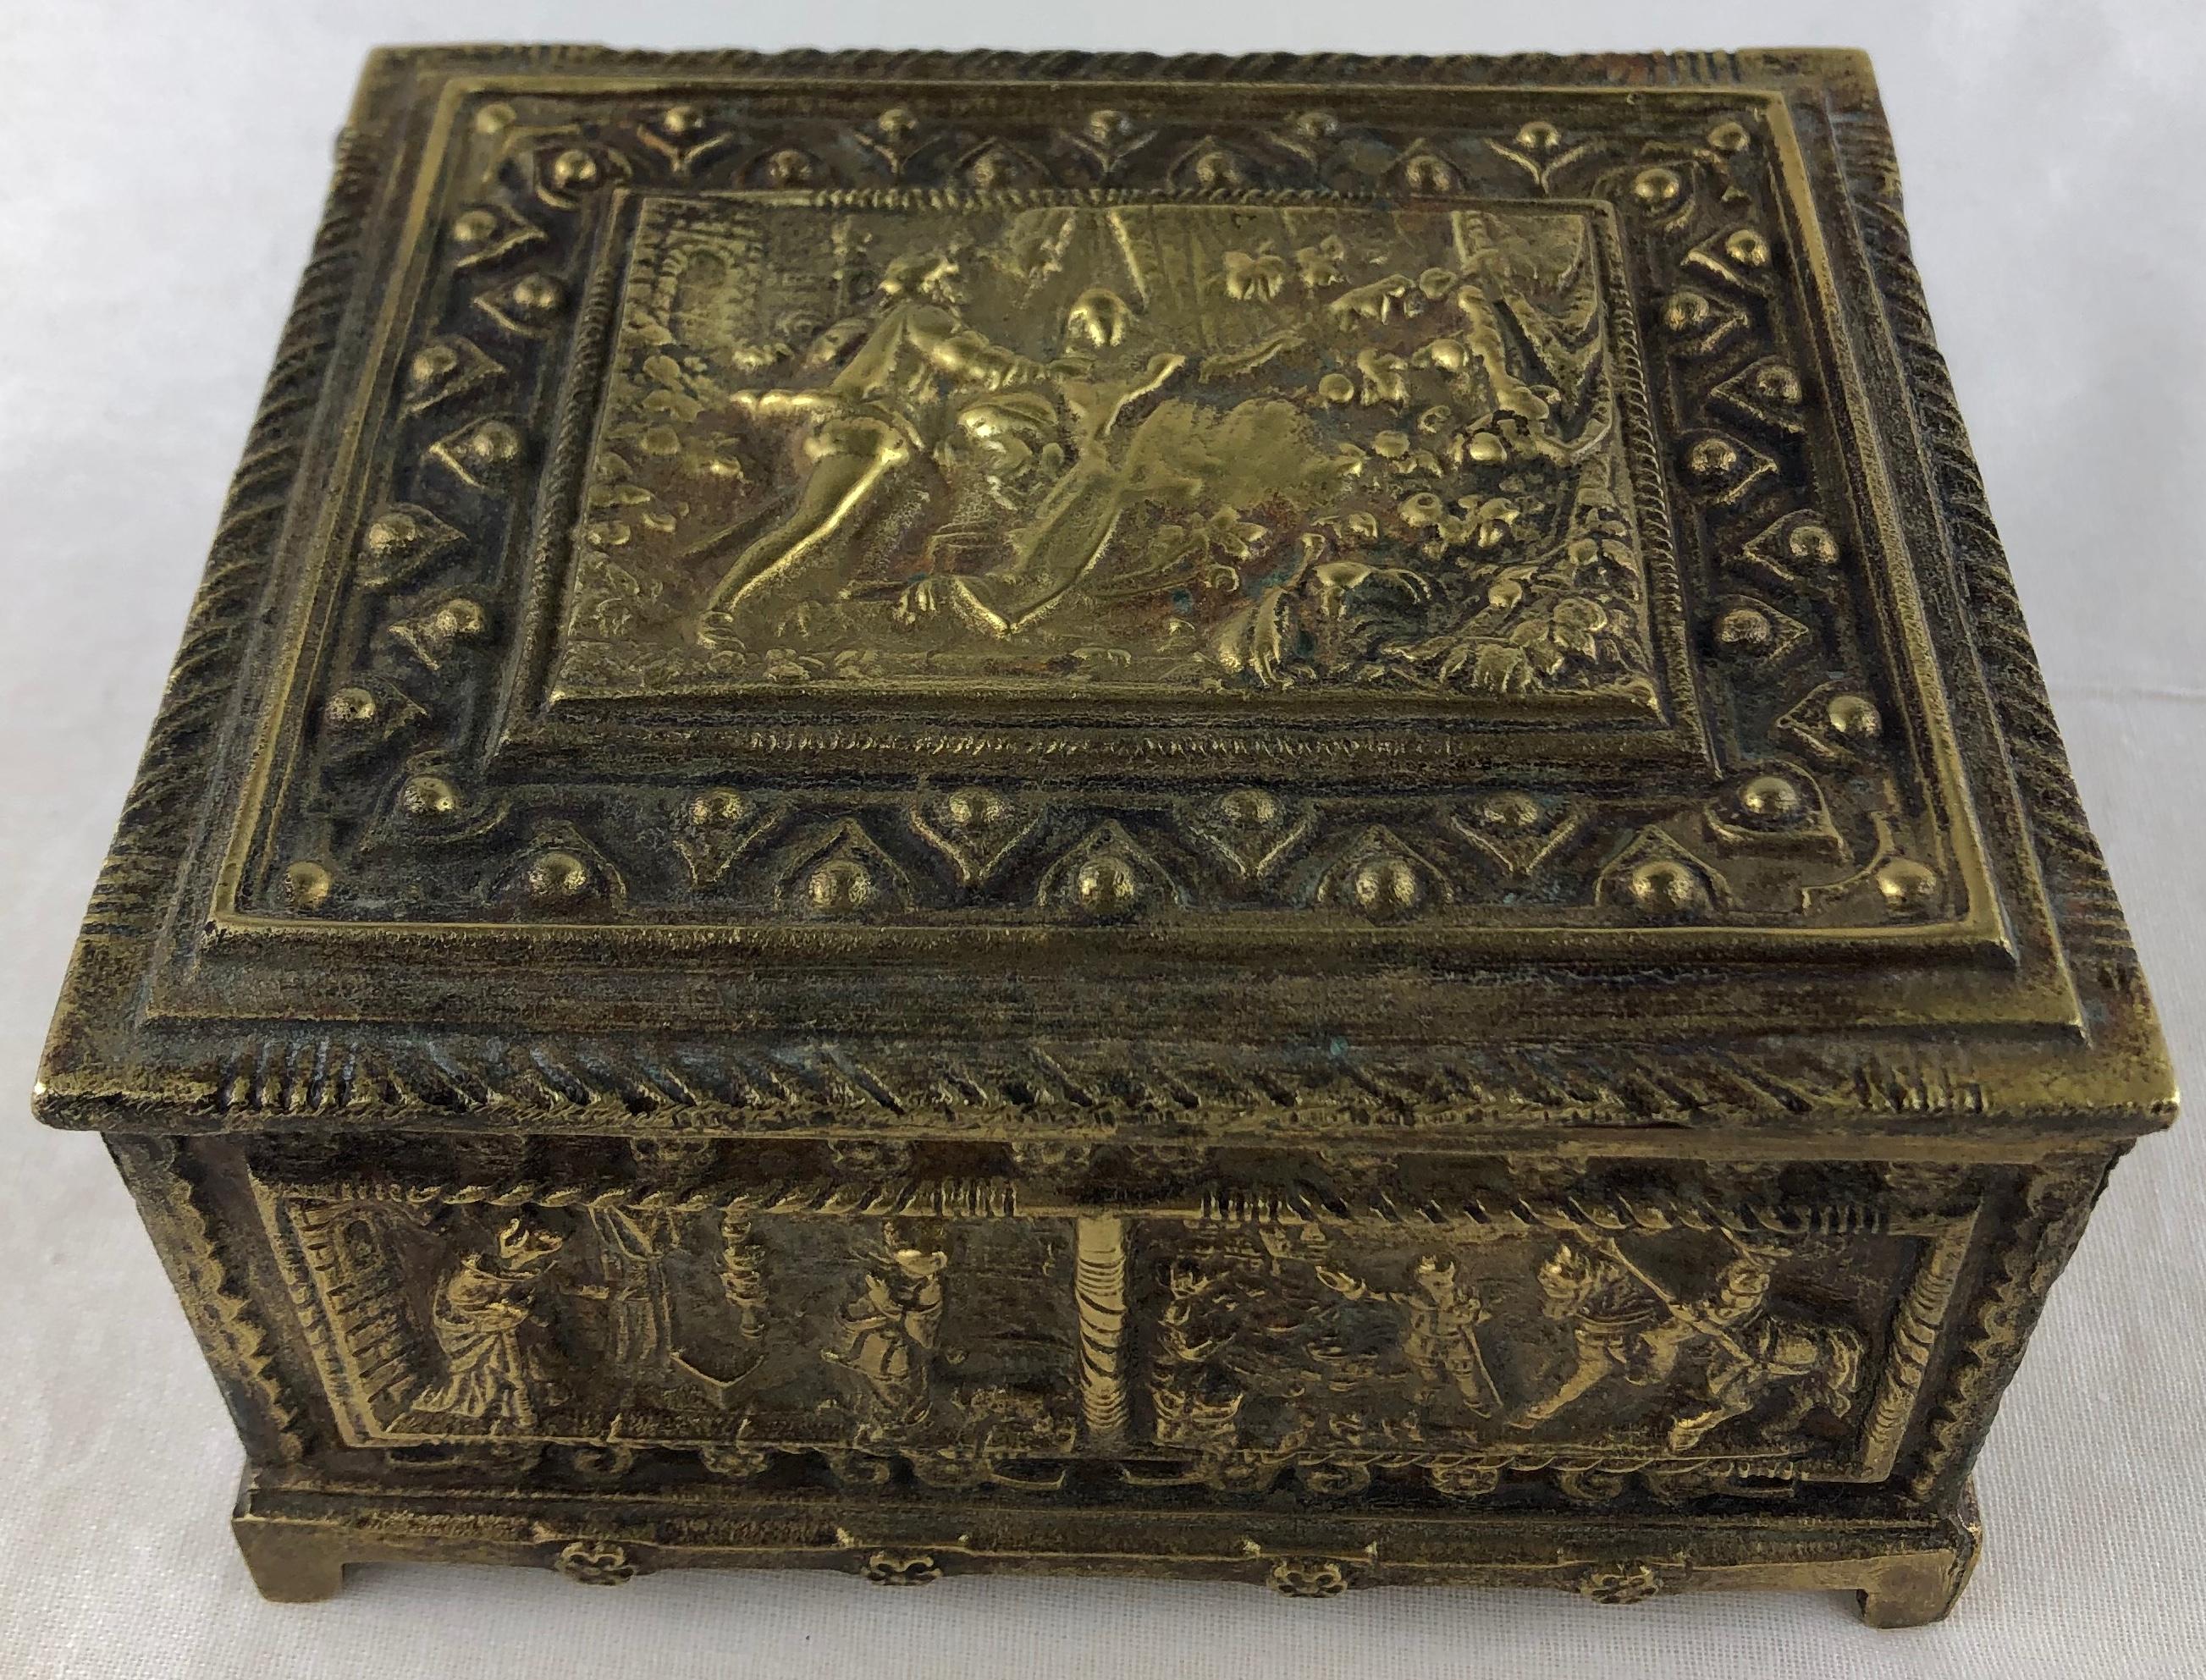 A French cast bronze jewelry box intricately designed and handcrafted, circa 1880s. 
This intricately carved box depicts the romantic poem of Le Roman de la Rose (The Romance of the Rose).

19th century, elaborately cast in high relief depicting